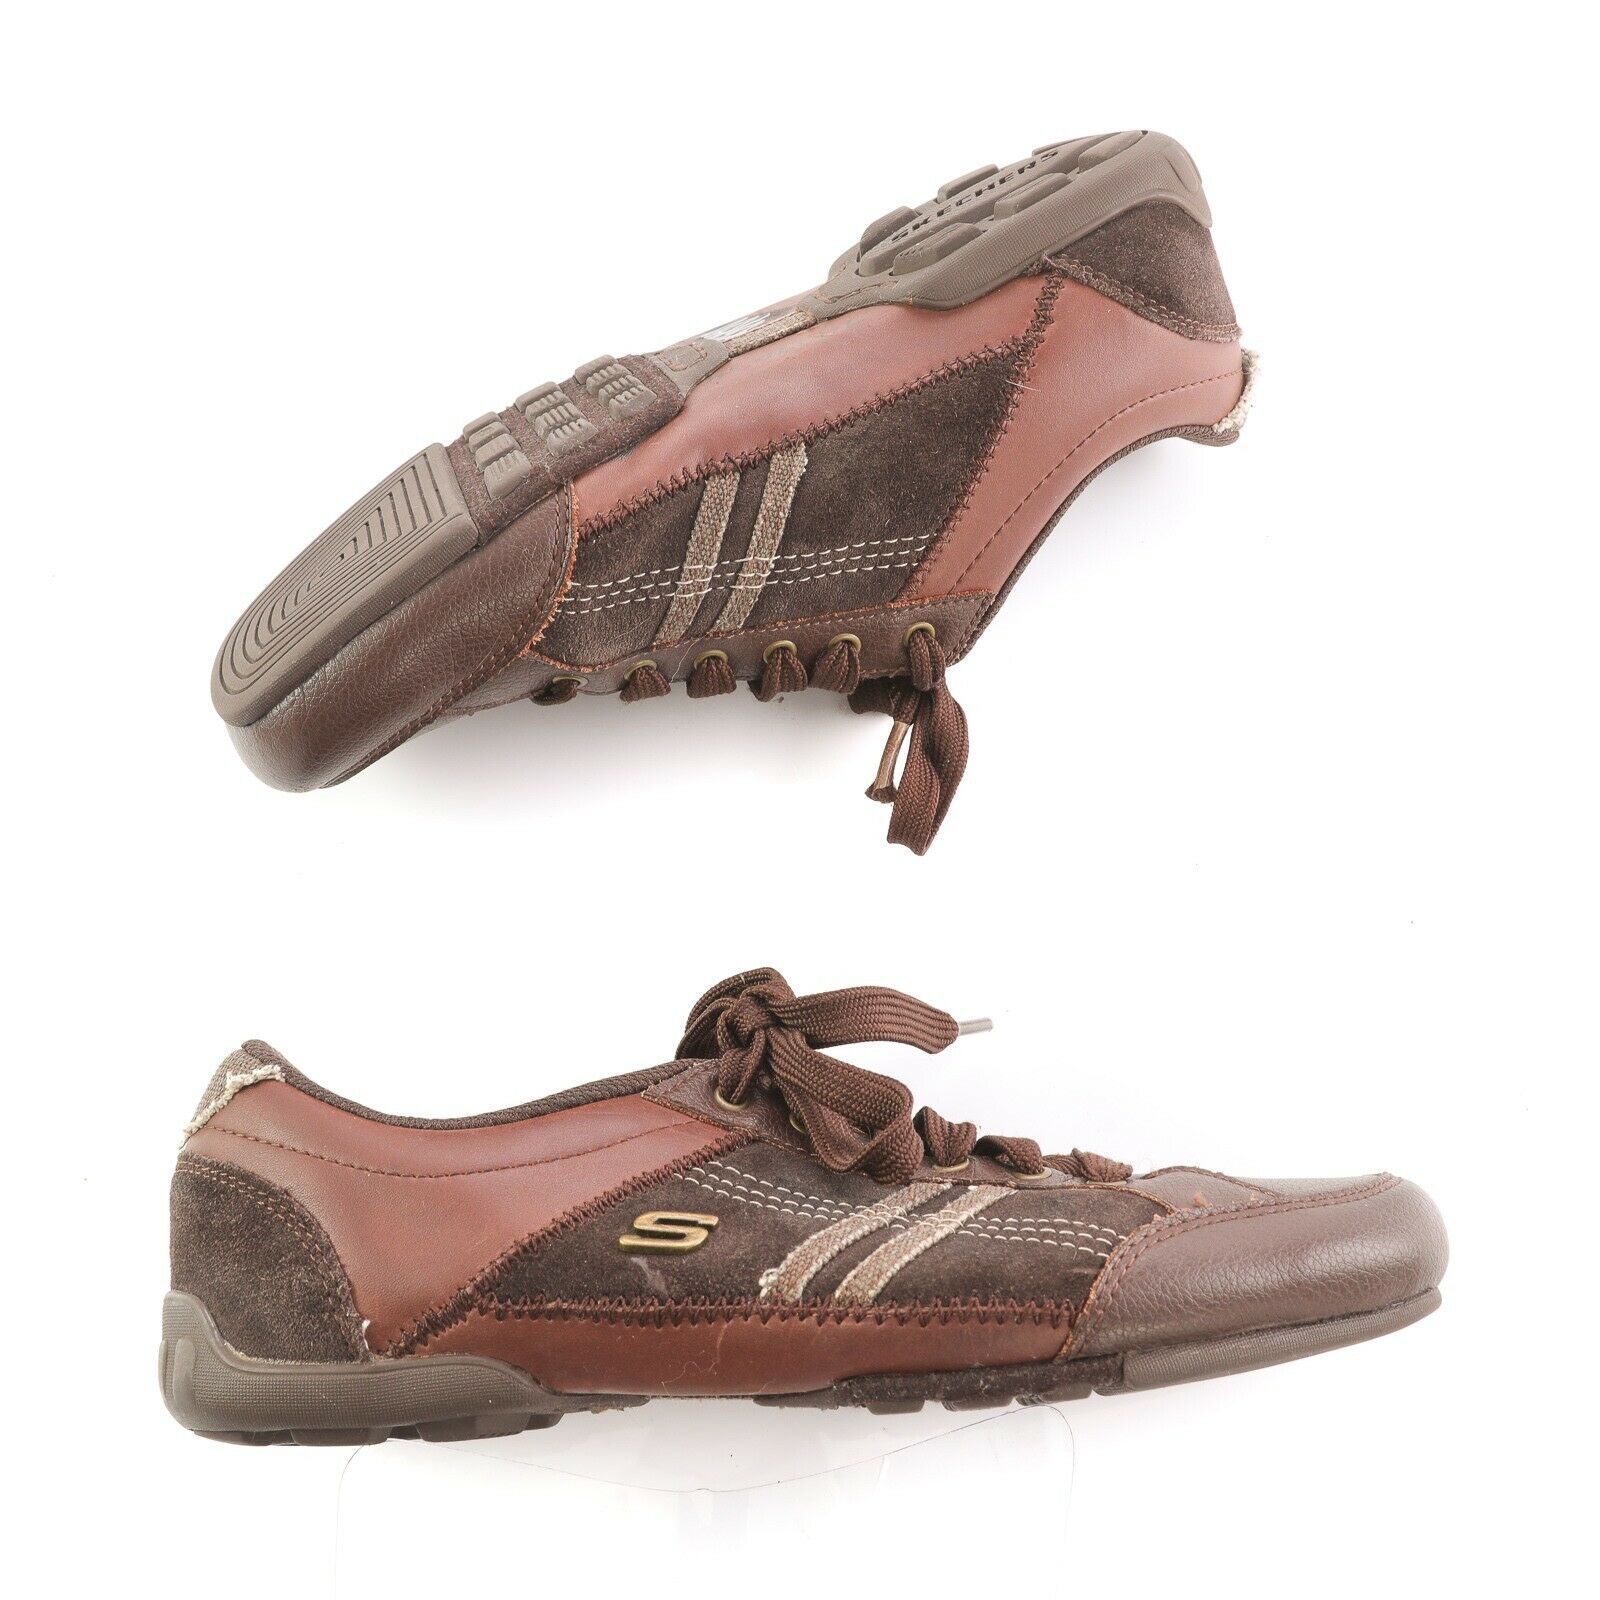 Skechers Brown Leather Suede Fashion Sneakers Comfort Shoes Womens 8 SN 46955 - $29.52